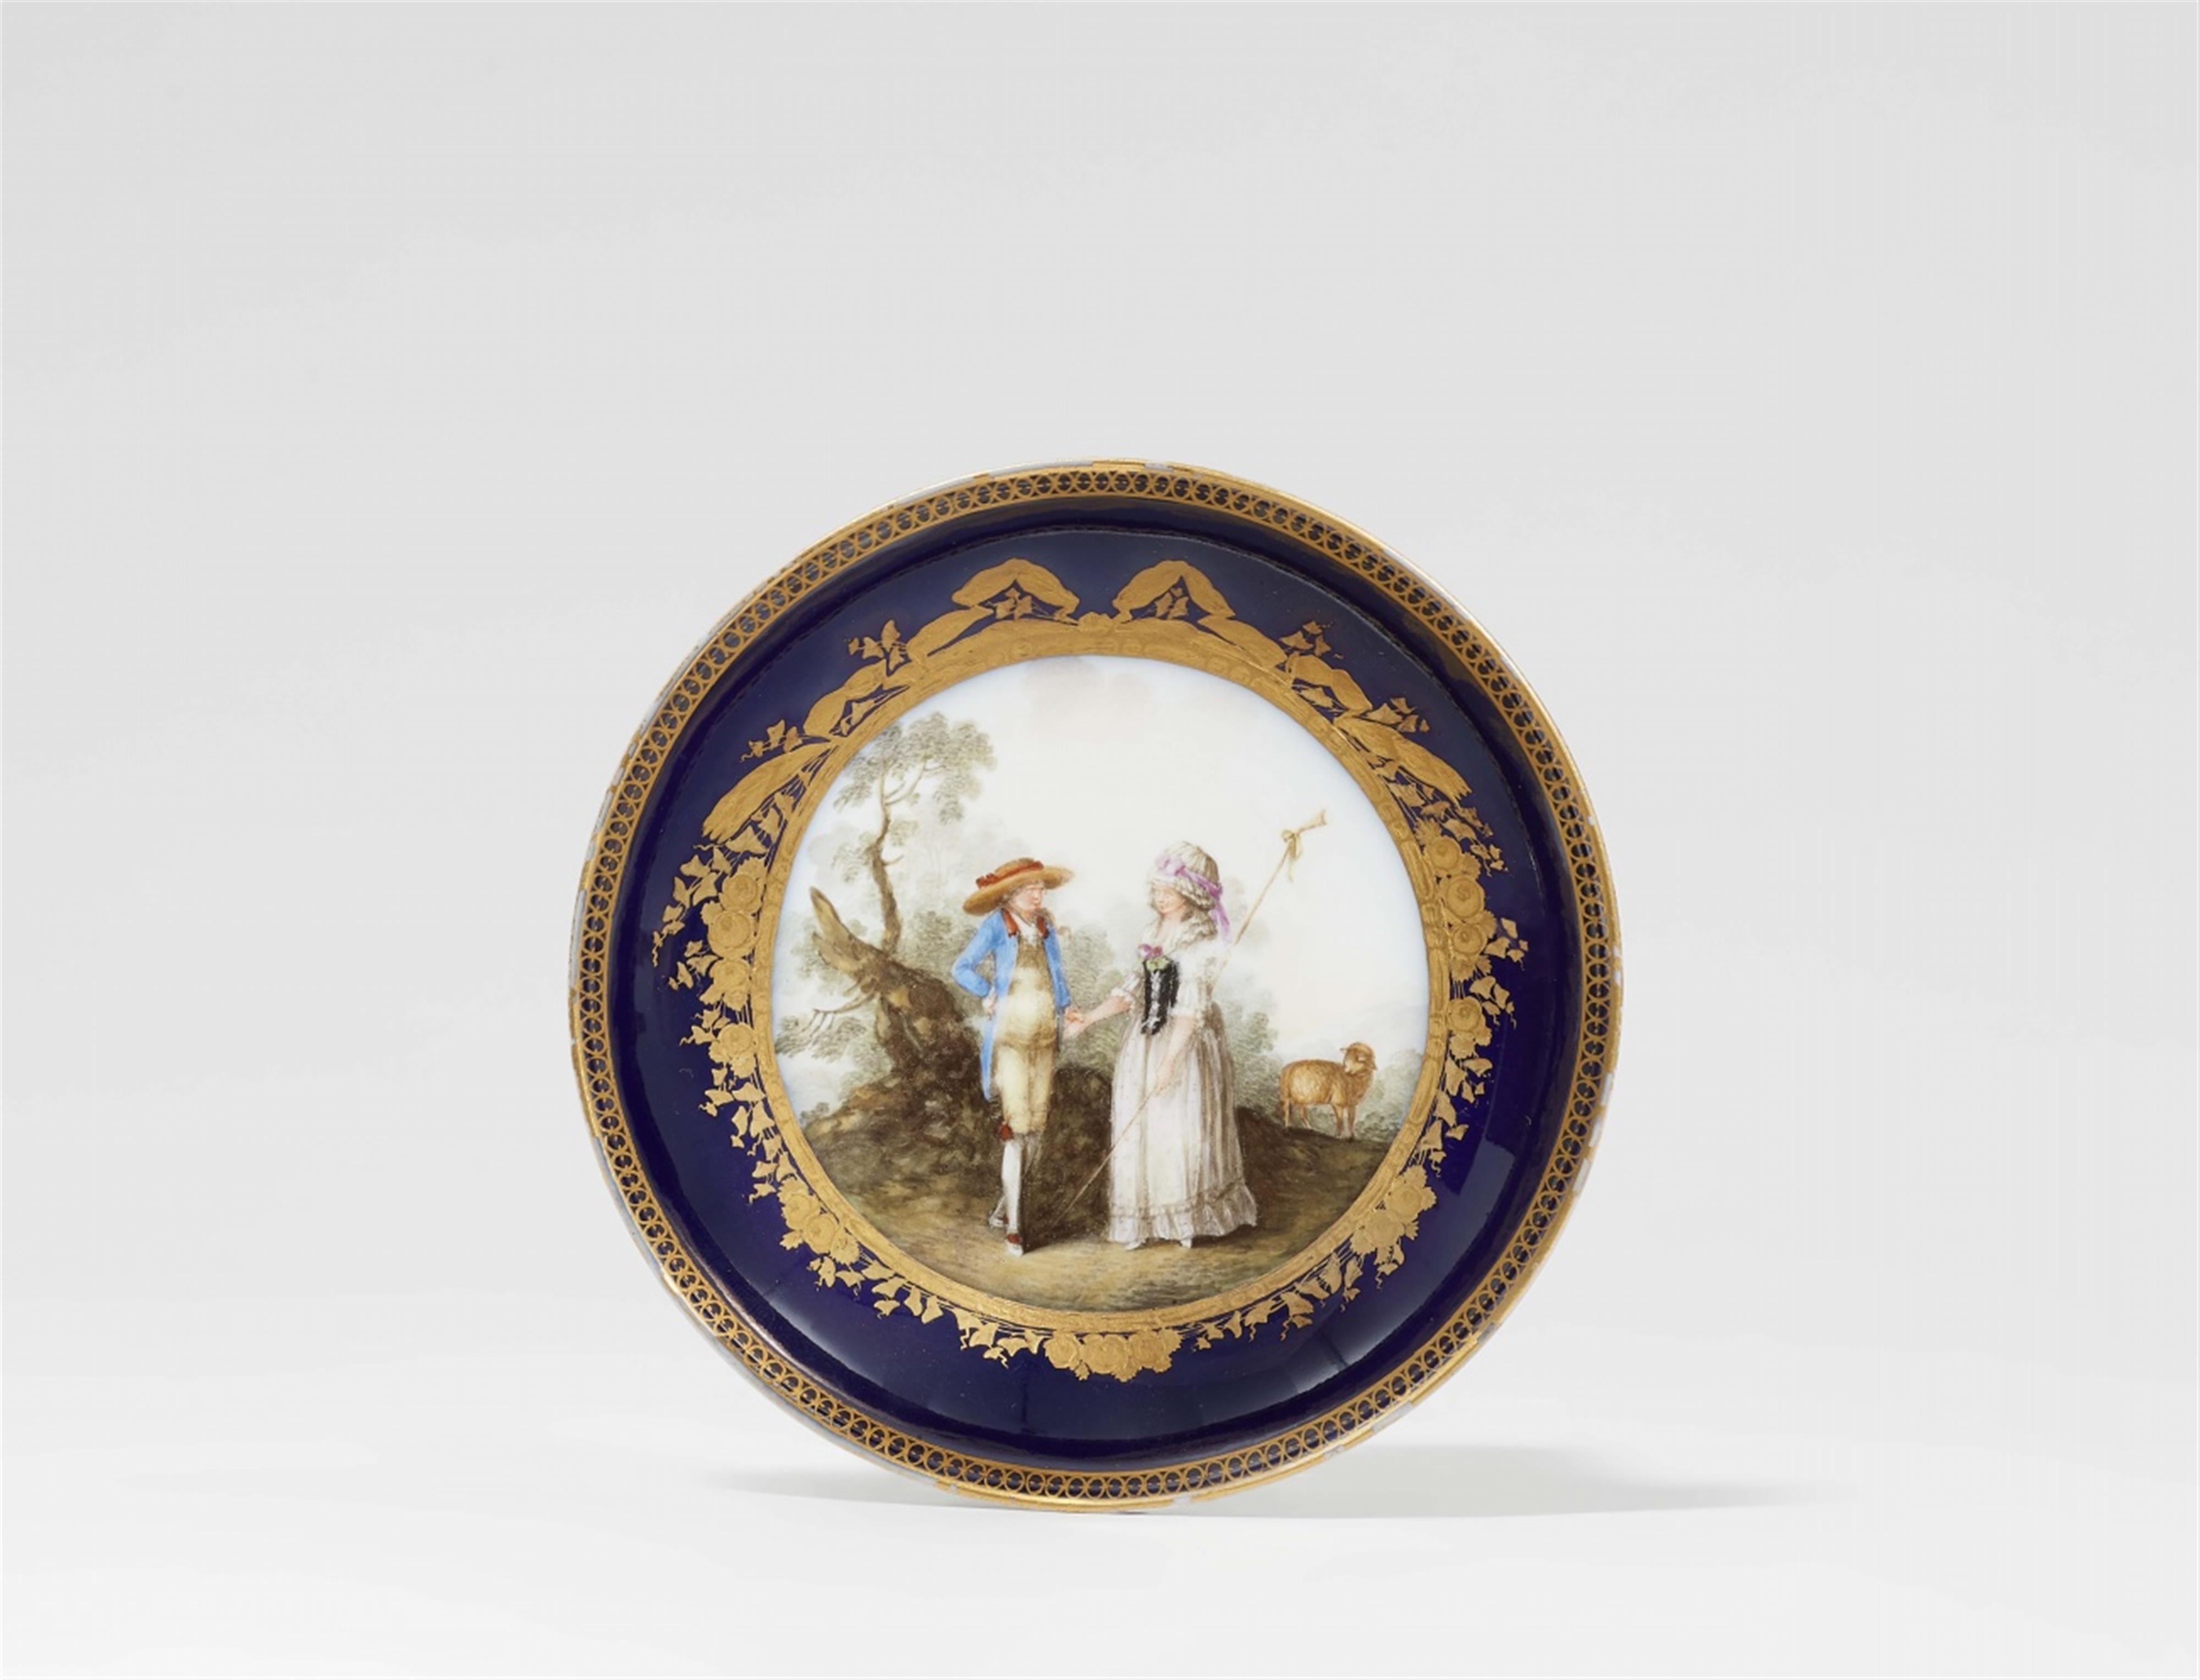 A Meissen porcelain saucer with a man in the costume of Goethe's Werther - image-1